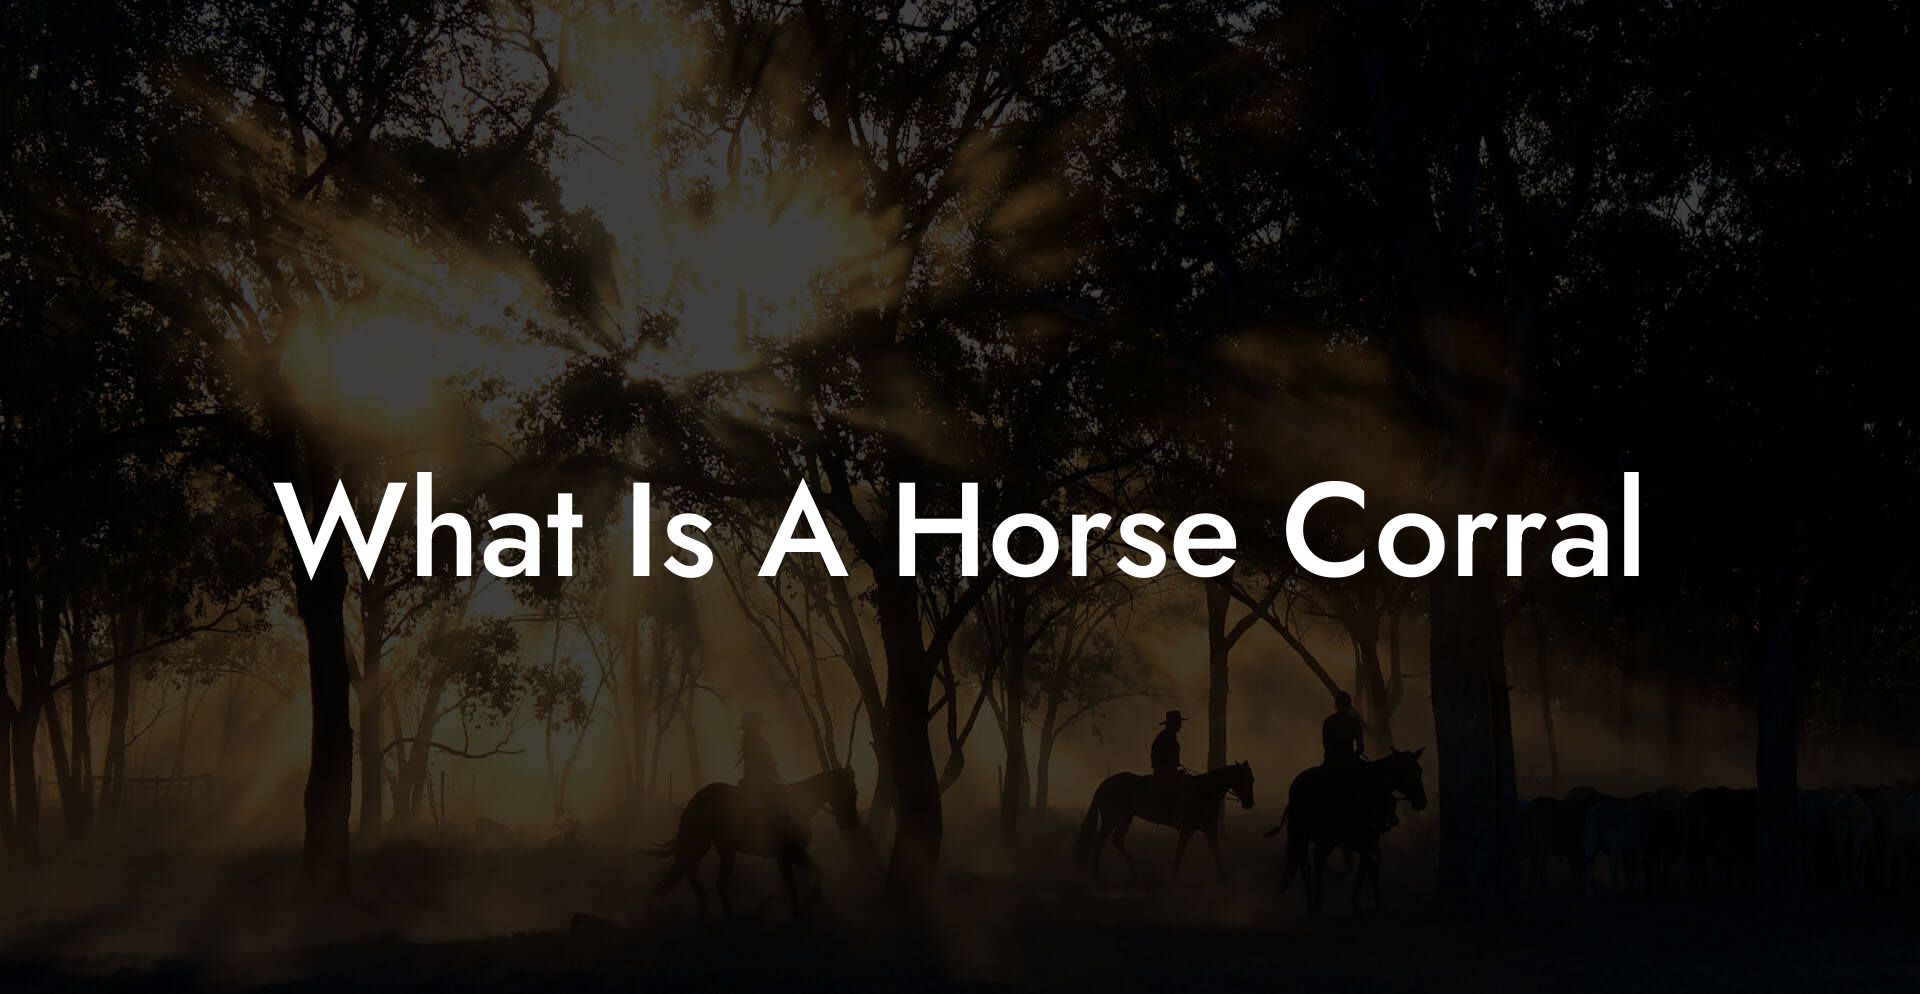 What Is A Horse Corral